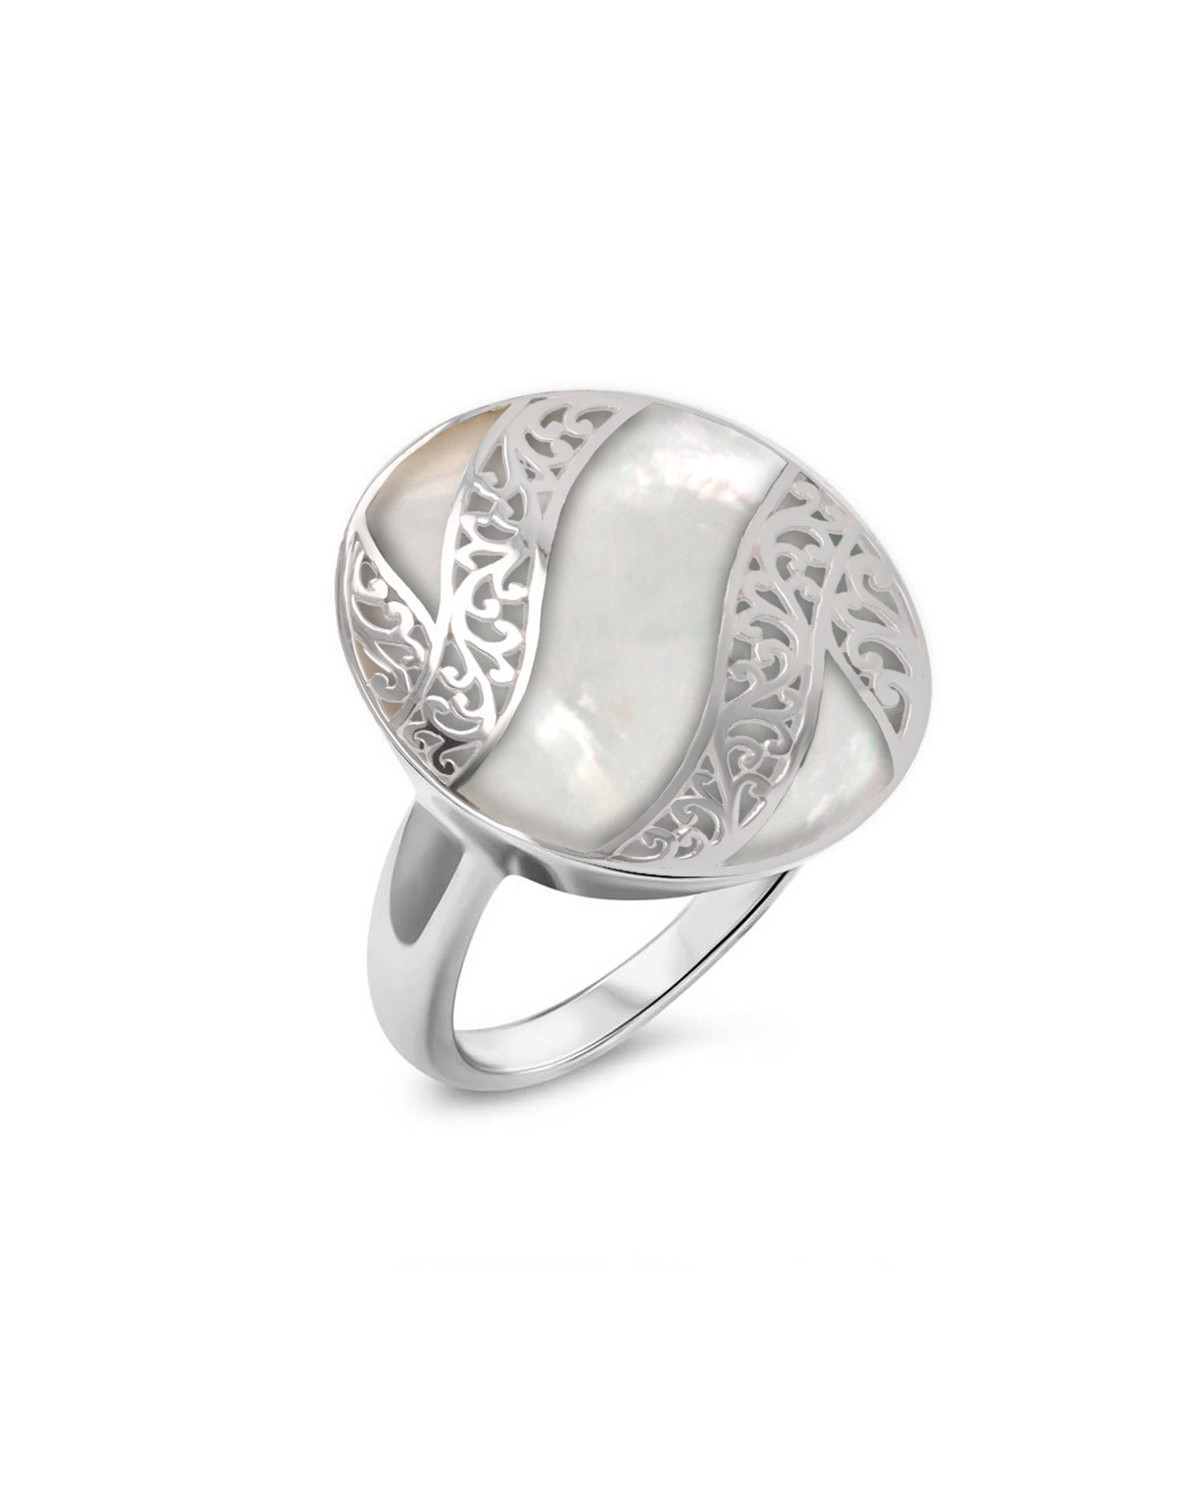 925 Sterling Silver White Mother-of-pearl Oval Shape Ring